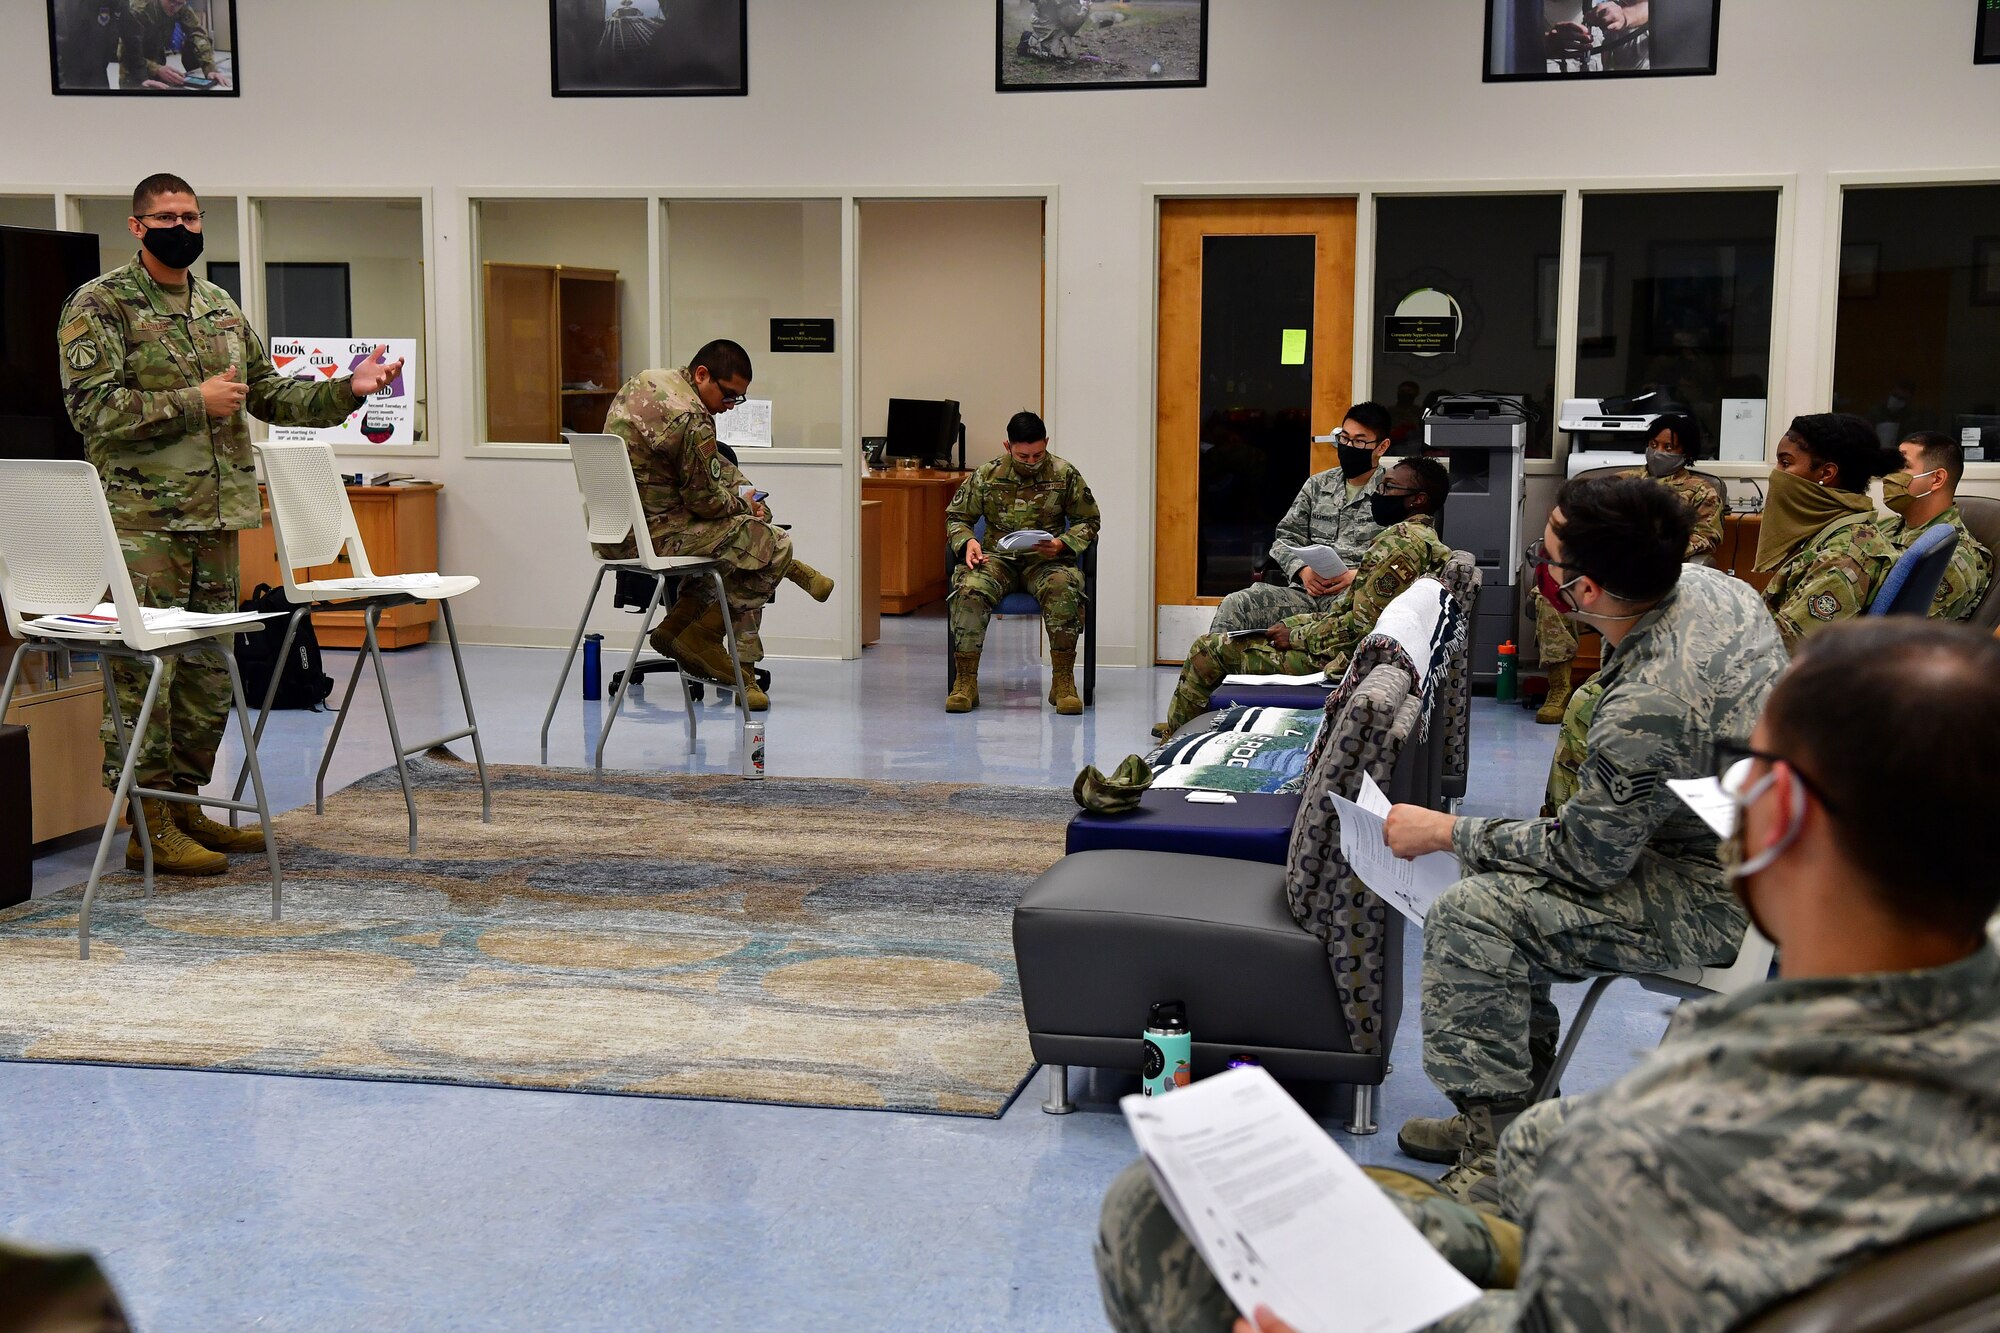 Senior Master Sgt. Brock Atchley, 19th Force Support Squadron career assistance advisor, teaches a class on professional development during Wingman Day at Little Rock Air Force Base.